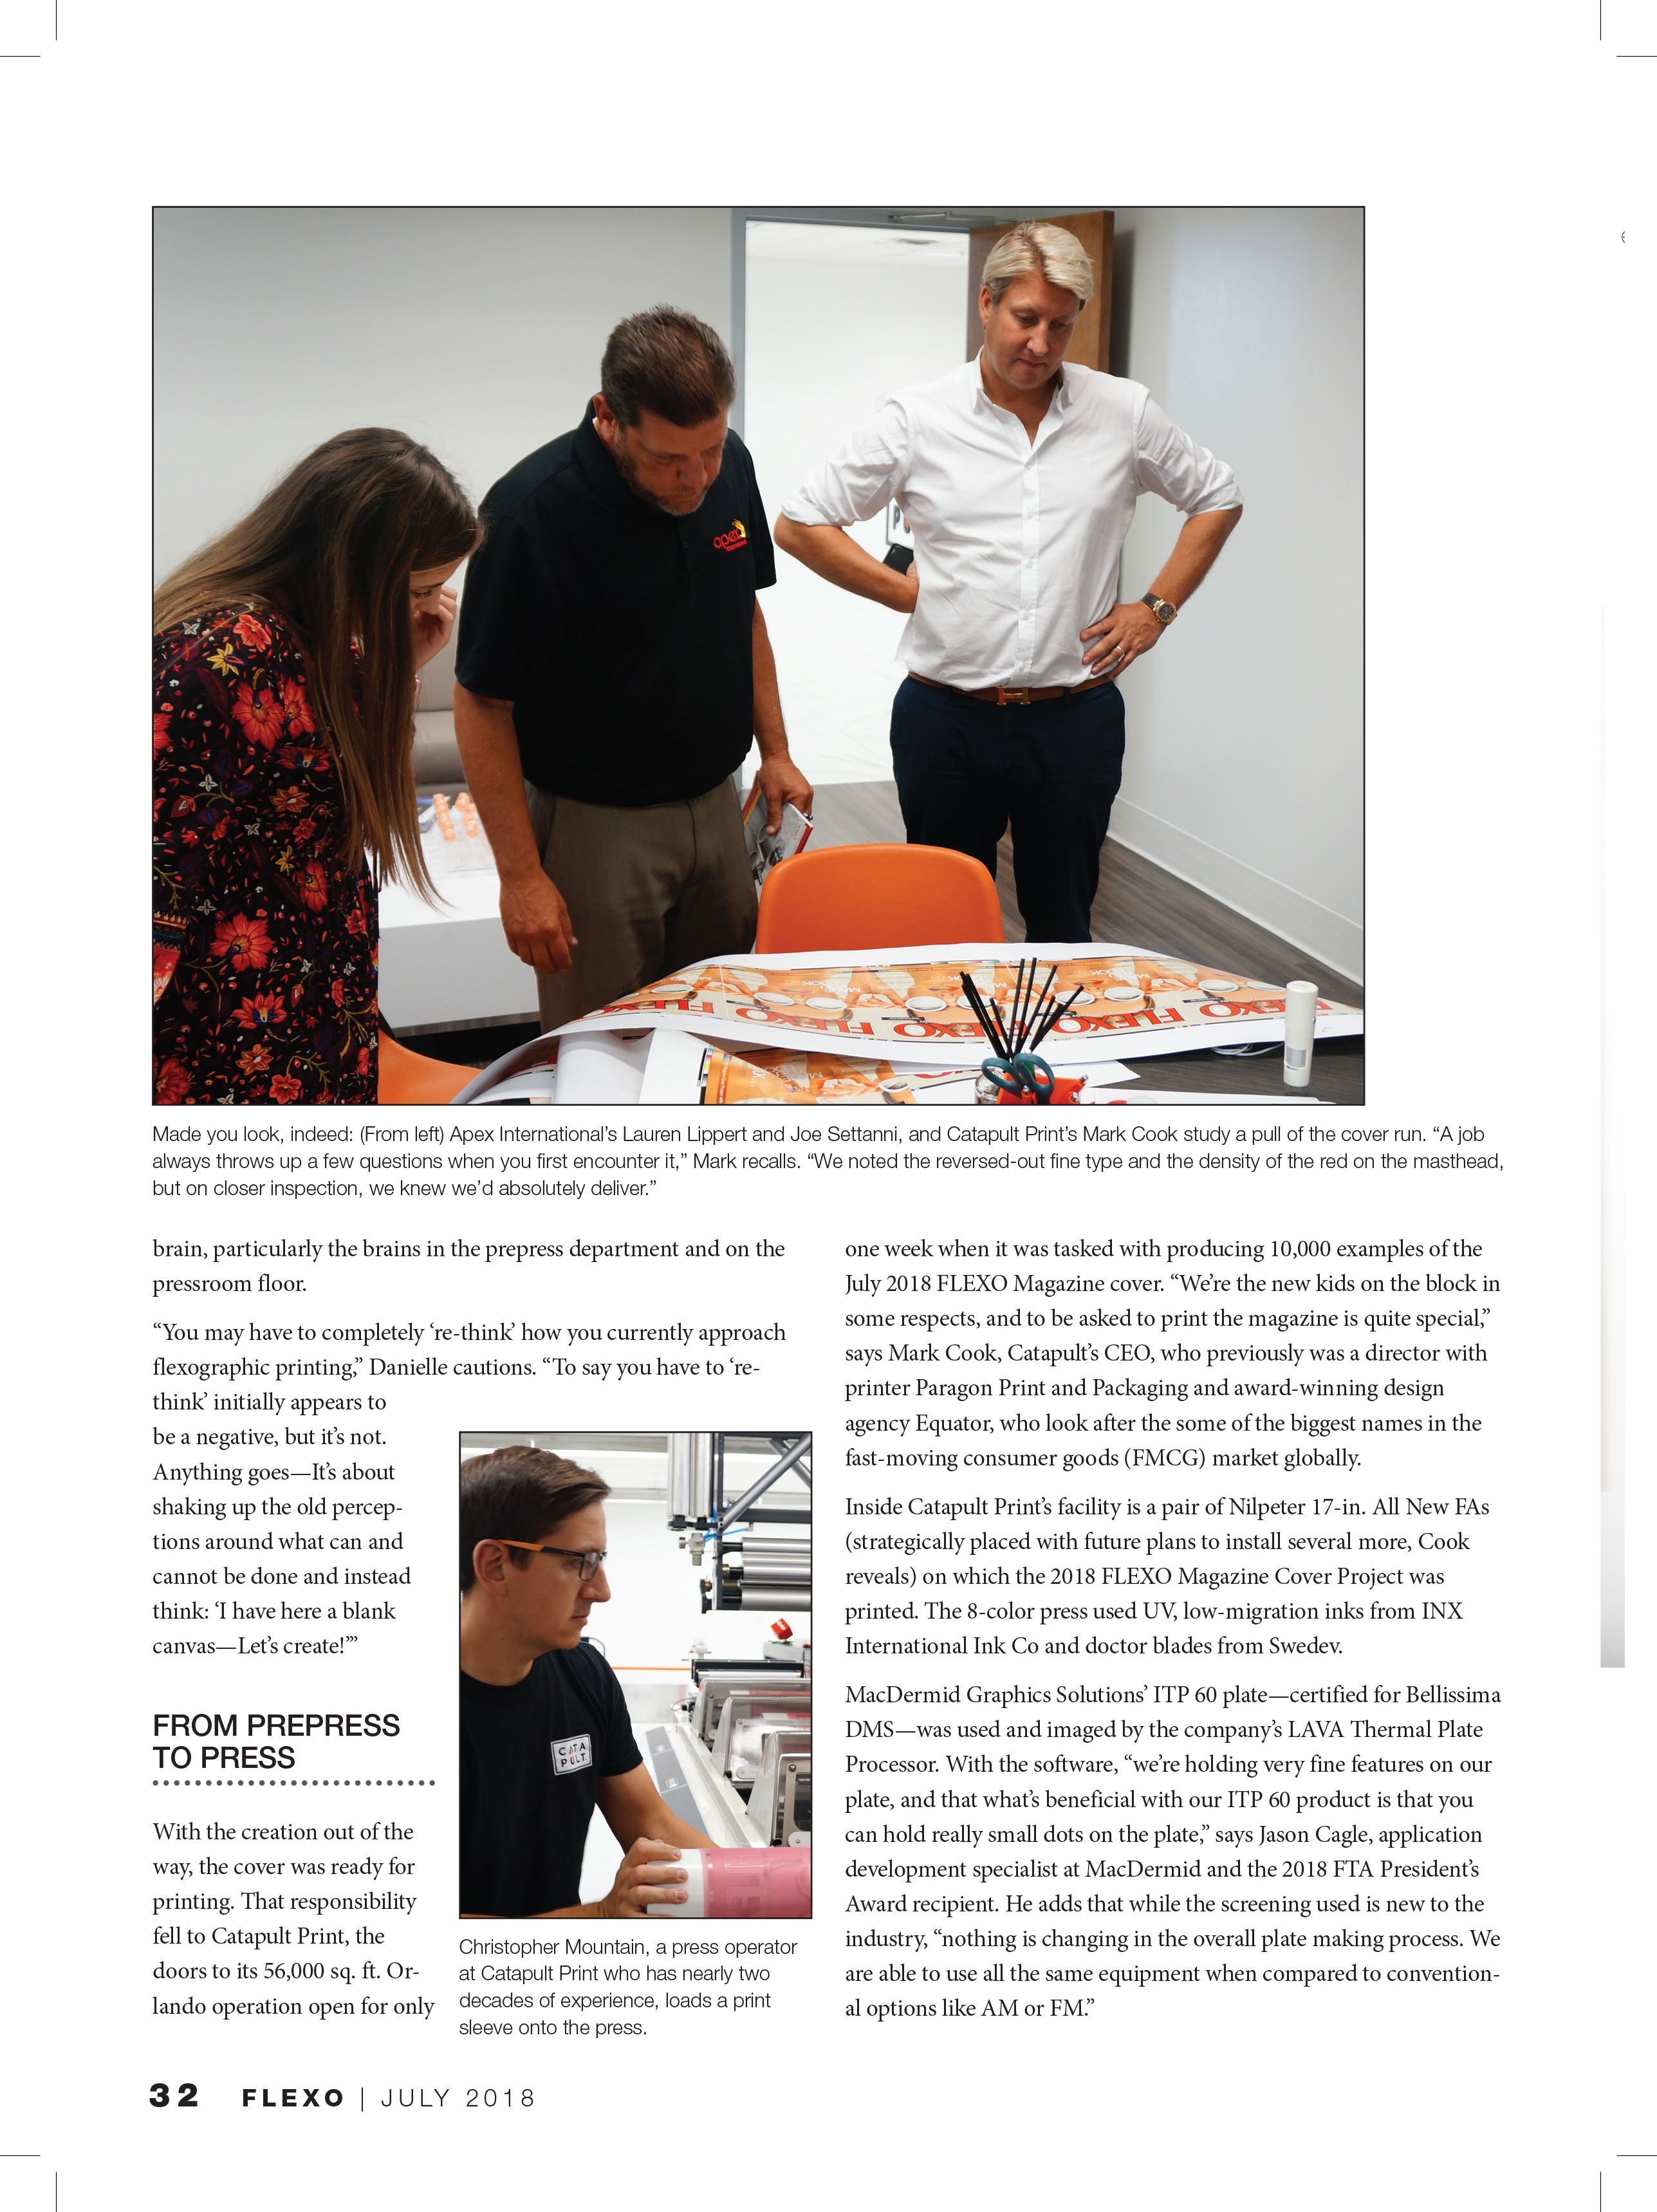 The 2018 FLEXO Magazine Cover Project Used Design & Software to Push Flexography Past Offset & Gravure